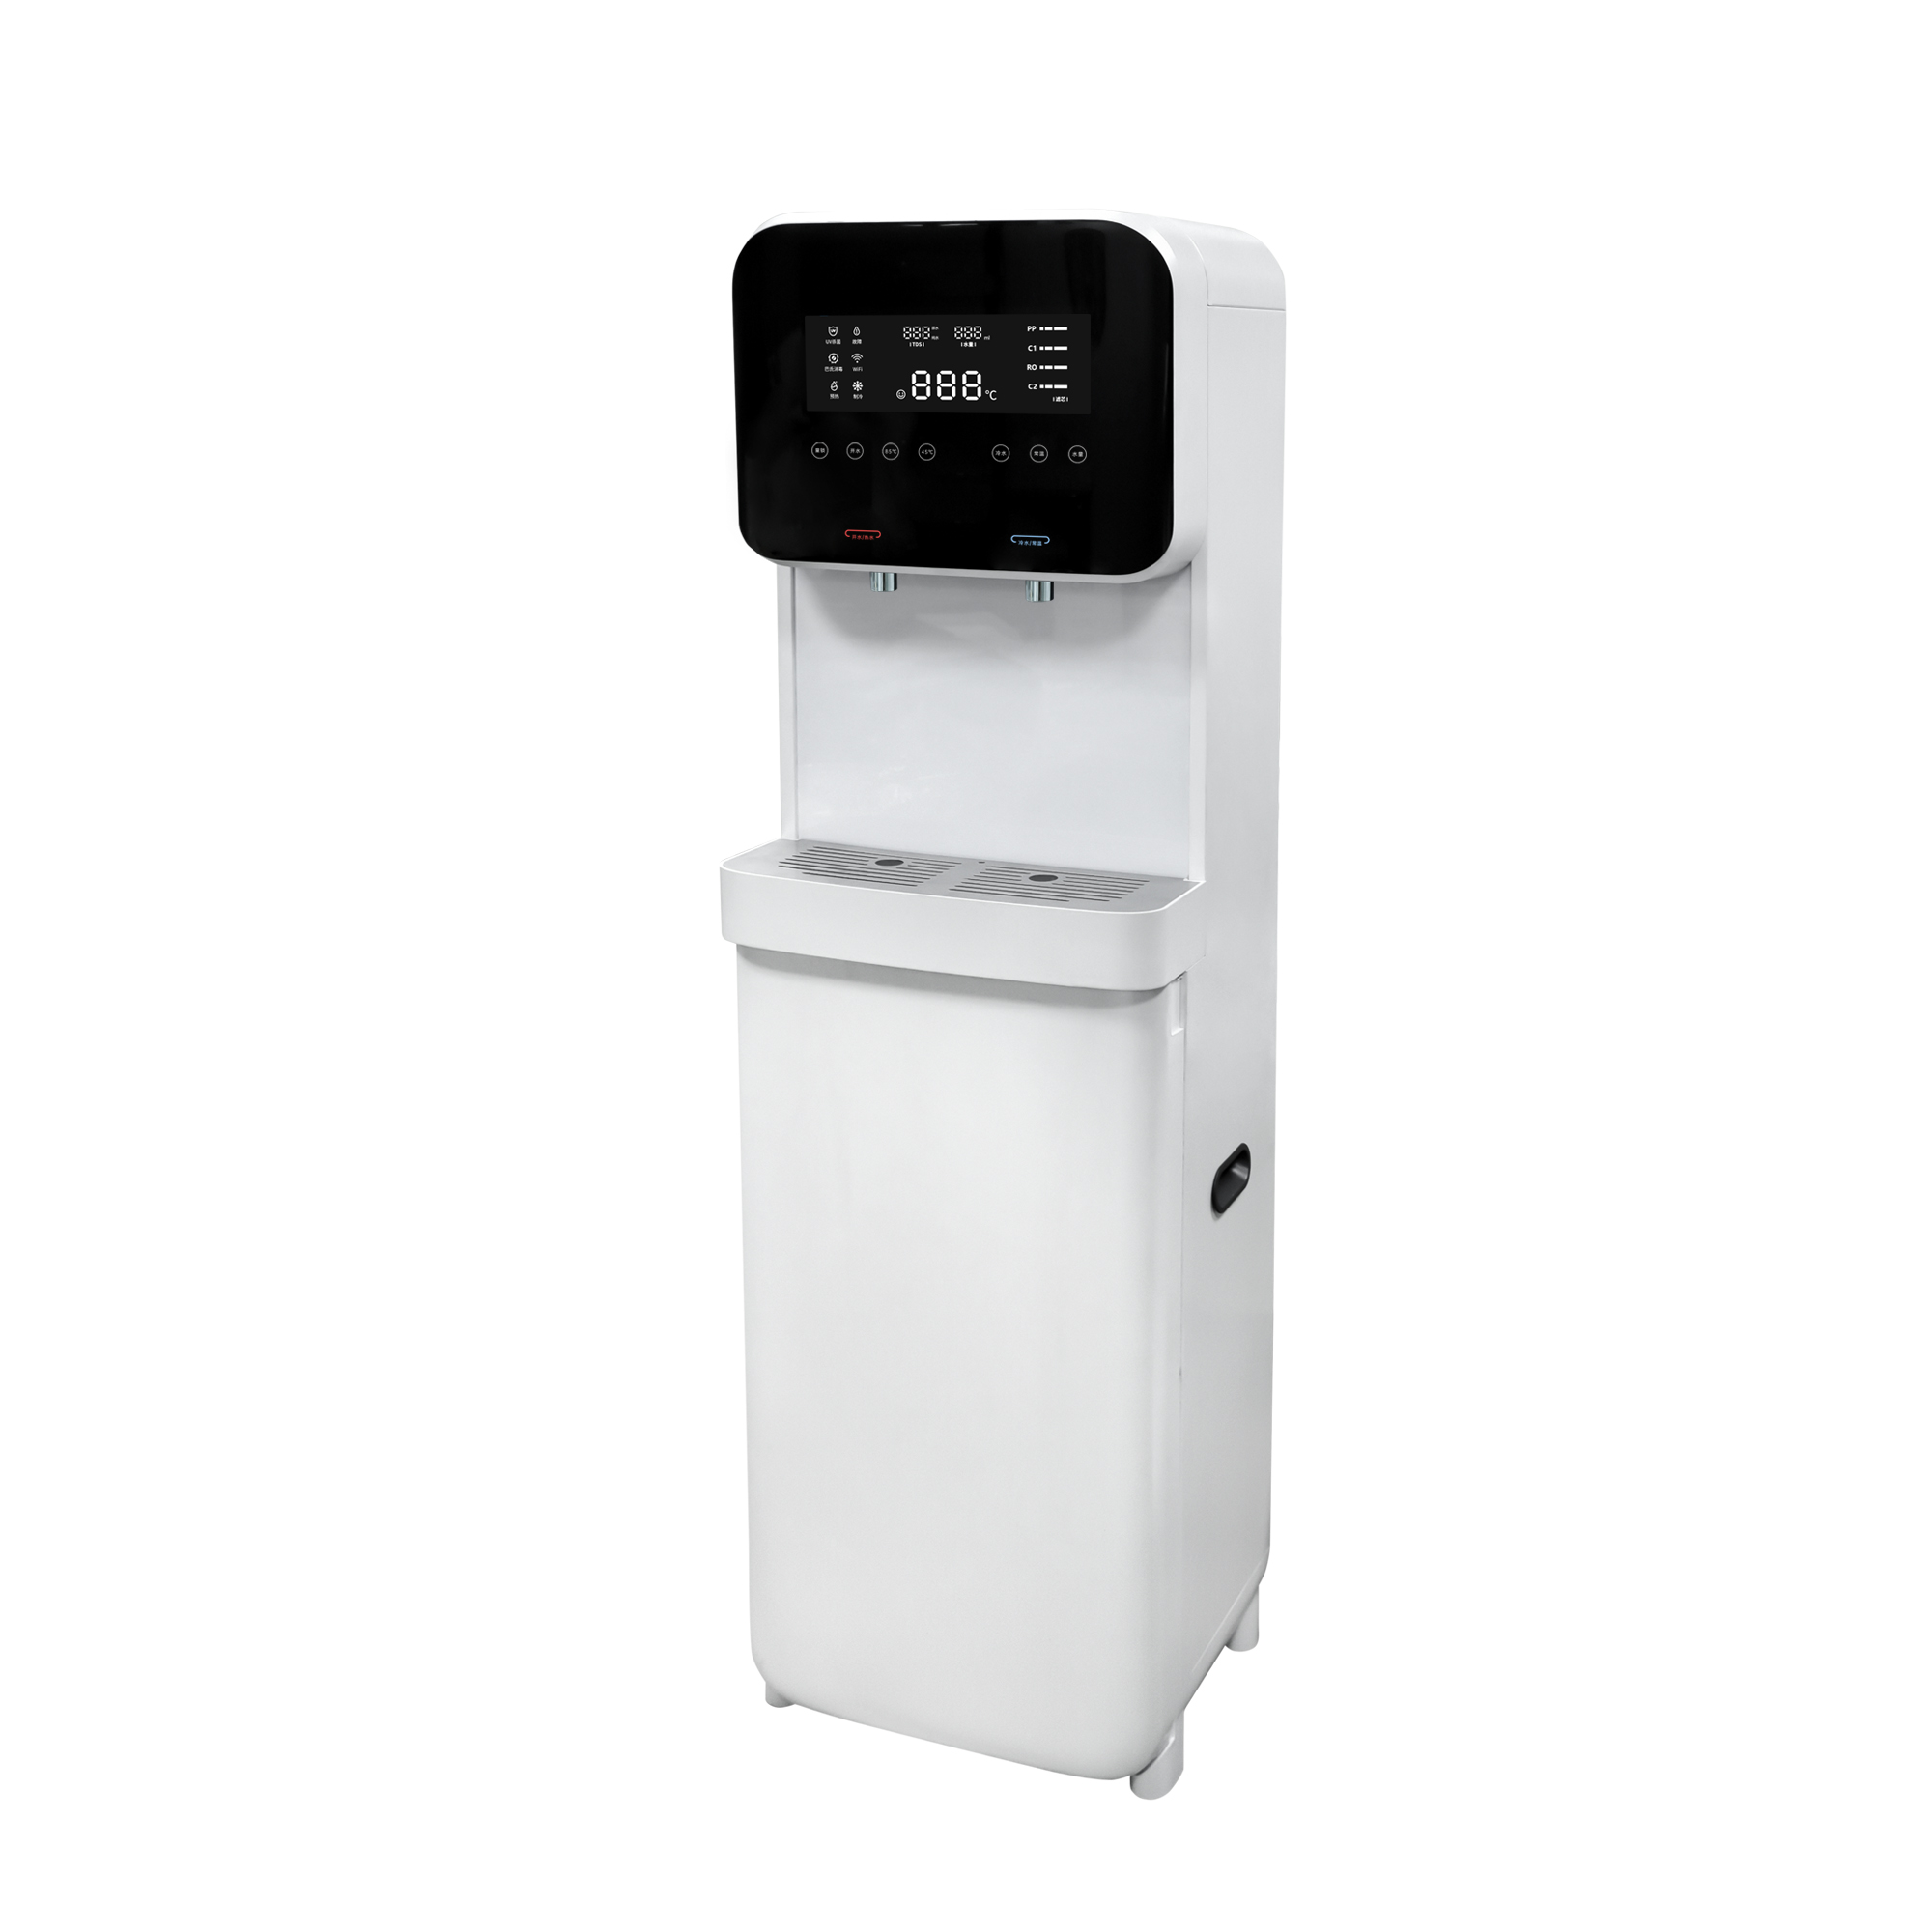 Standing hot and cold water dispenser with 4 stage water filter